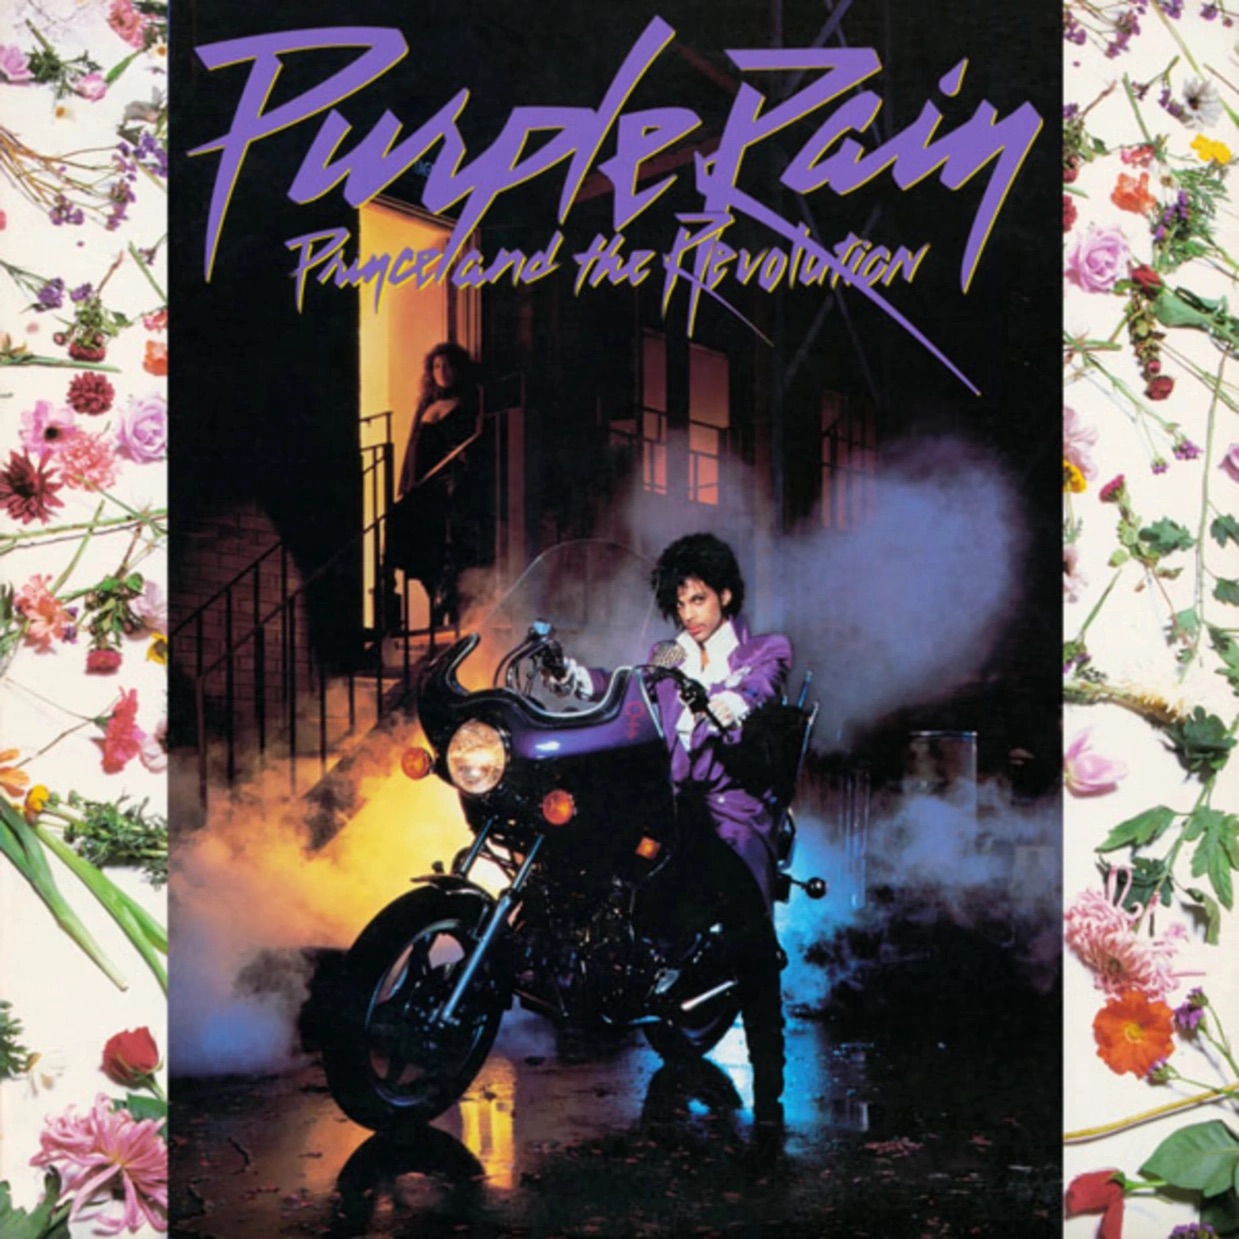 Purple Rain album cover by Prince - with a nod to the Tamla Motown yellow and maroon colours?